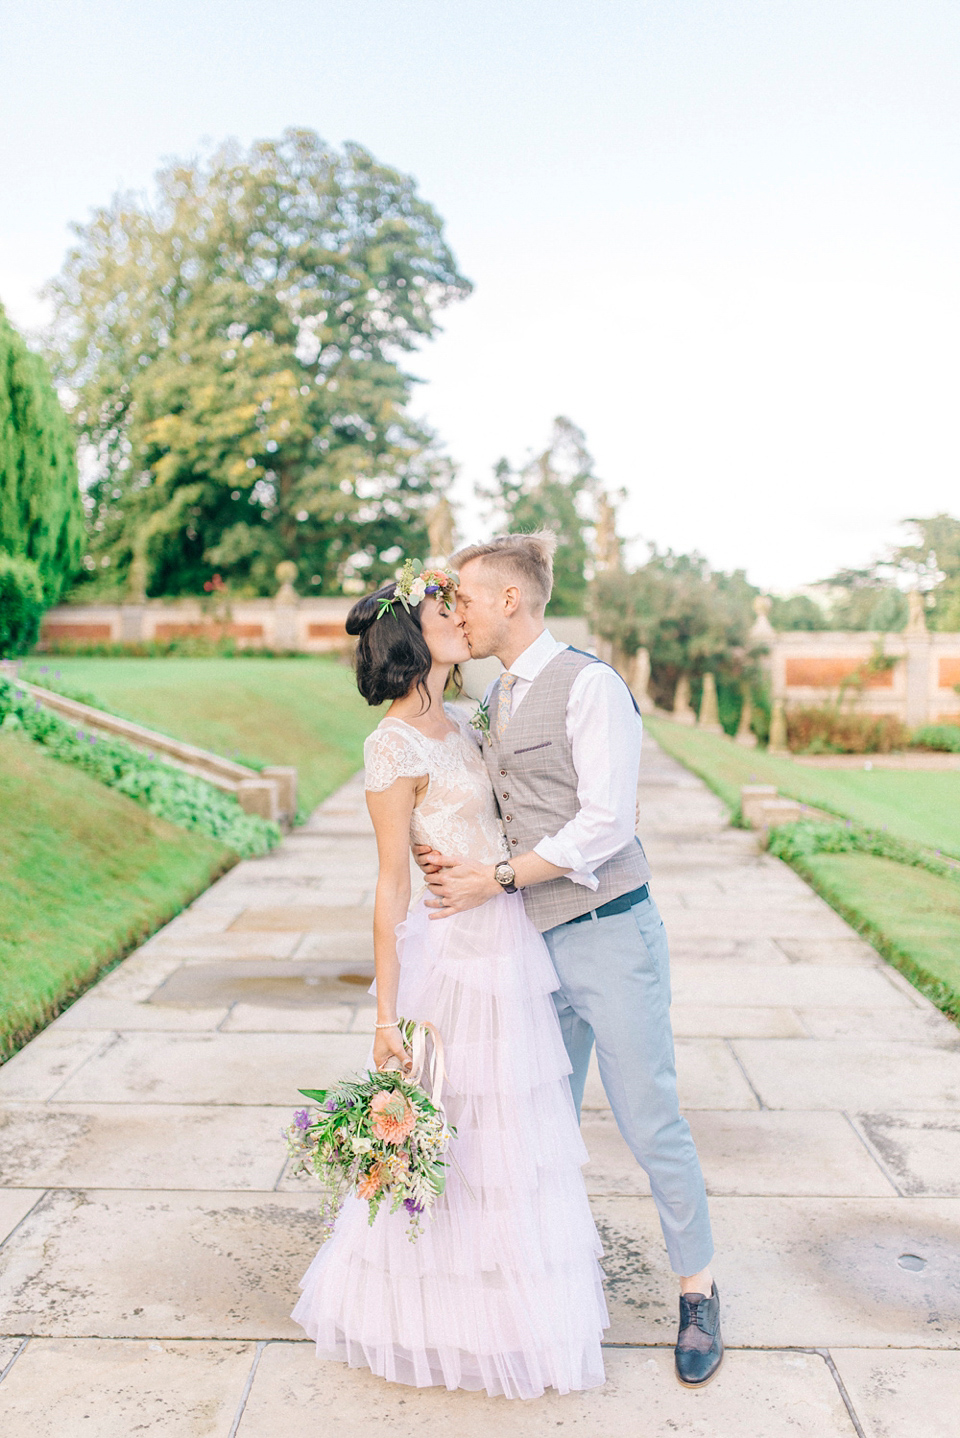 Bride Laura wore a tiered wedding dress by Katya Katya Shehurina for her peach wedding at Lartington Hall in Teesdale. Photography by Sarah Jane Ethan.